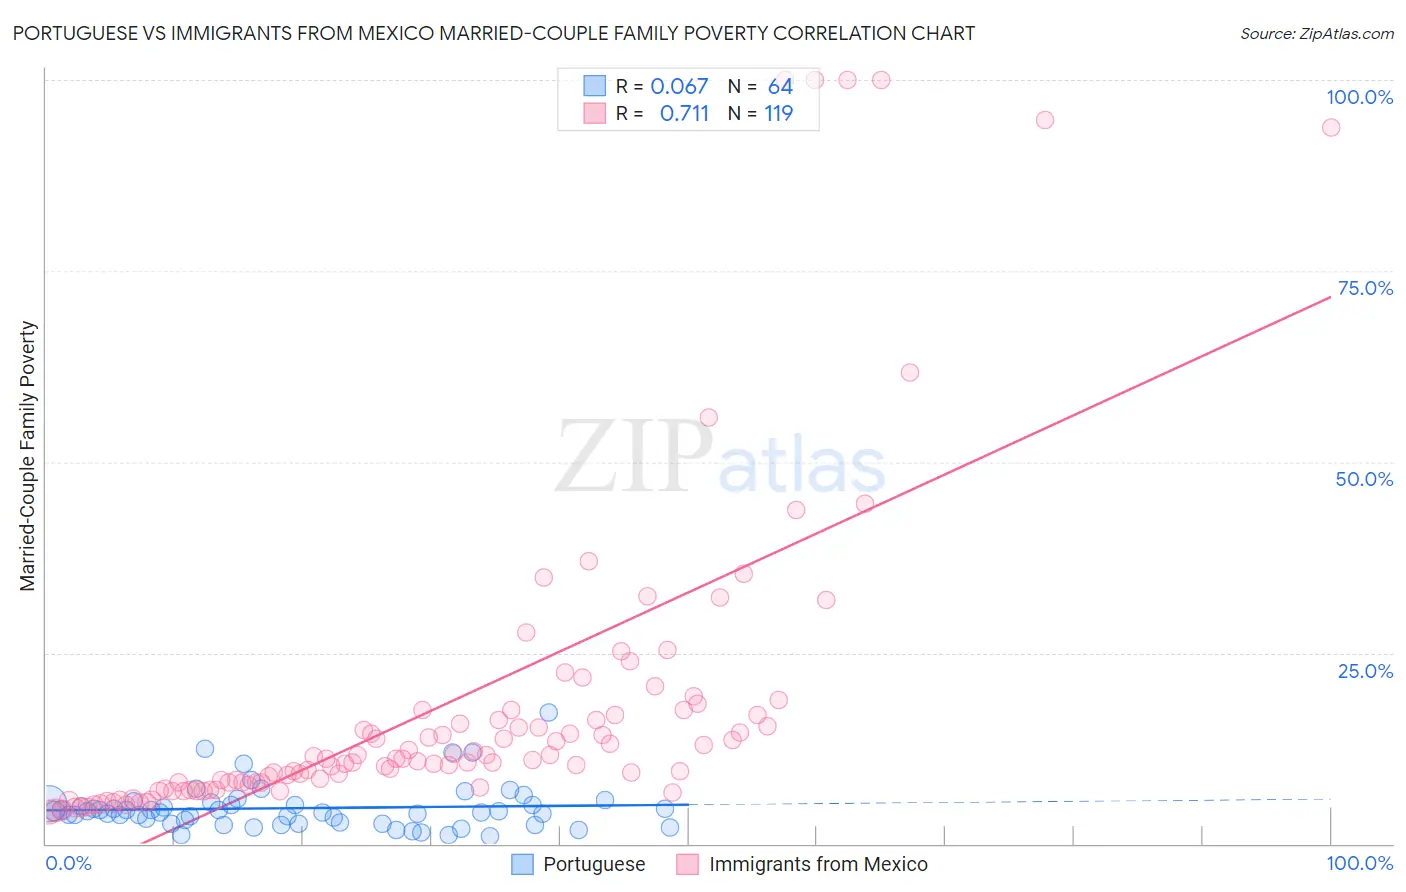 Portuguese vs Immigrants from Mexico Married-Couple Family Poverty